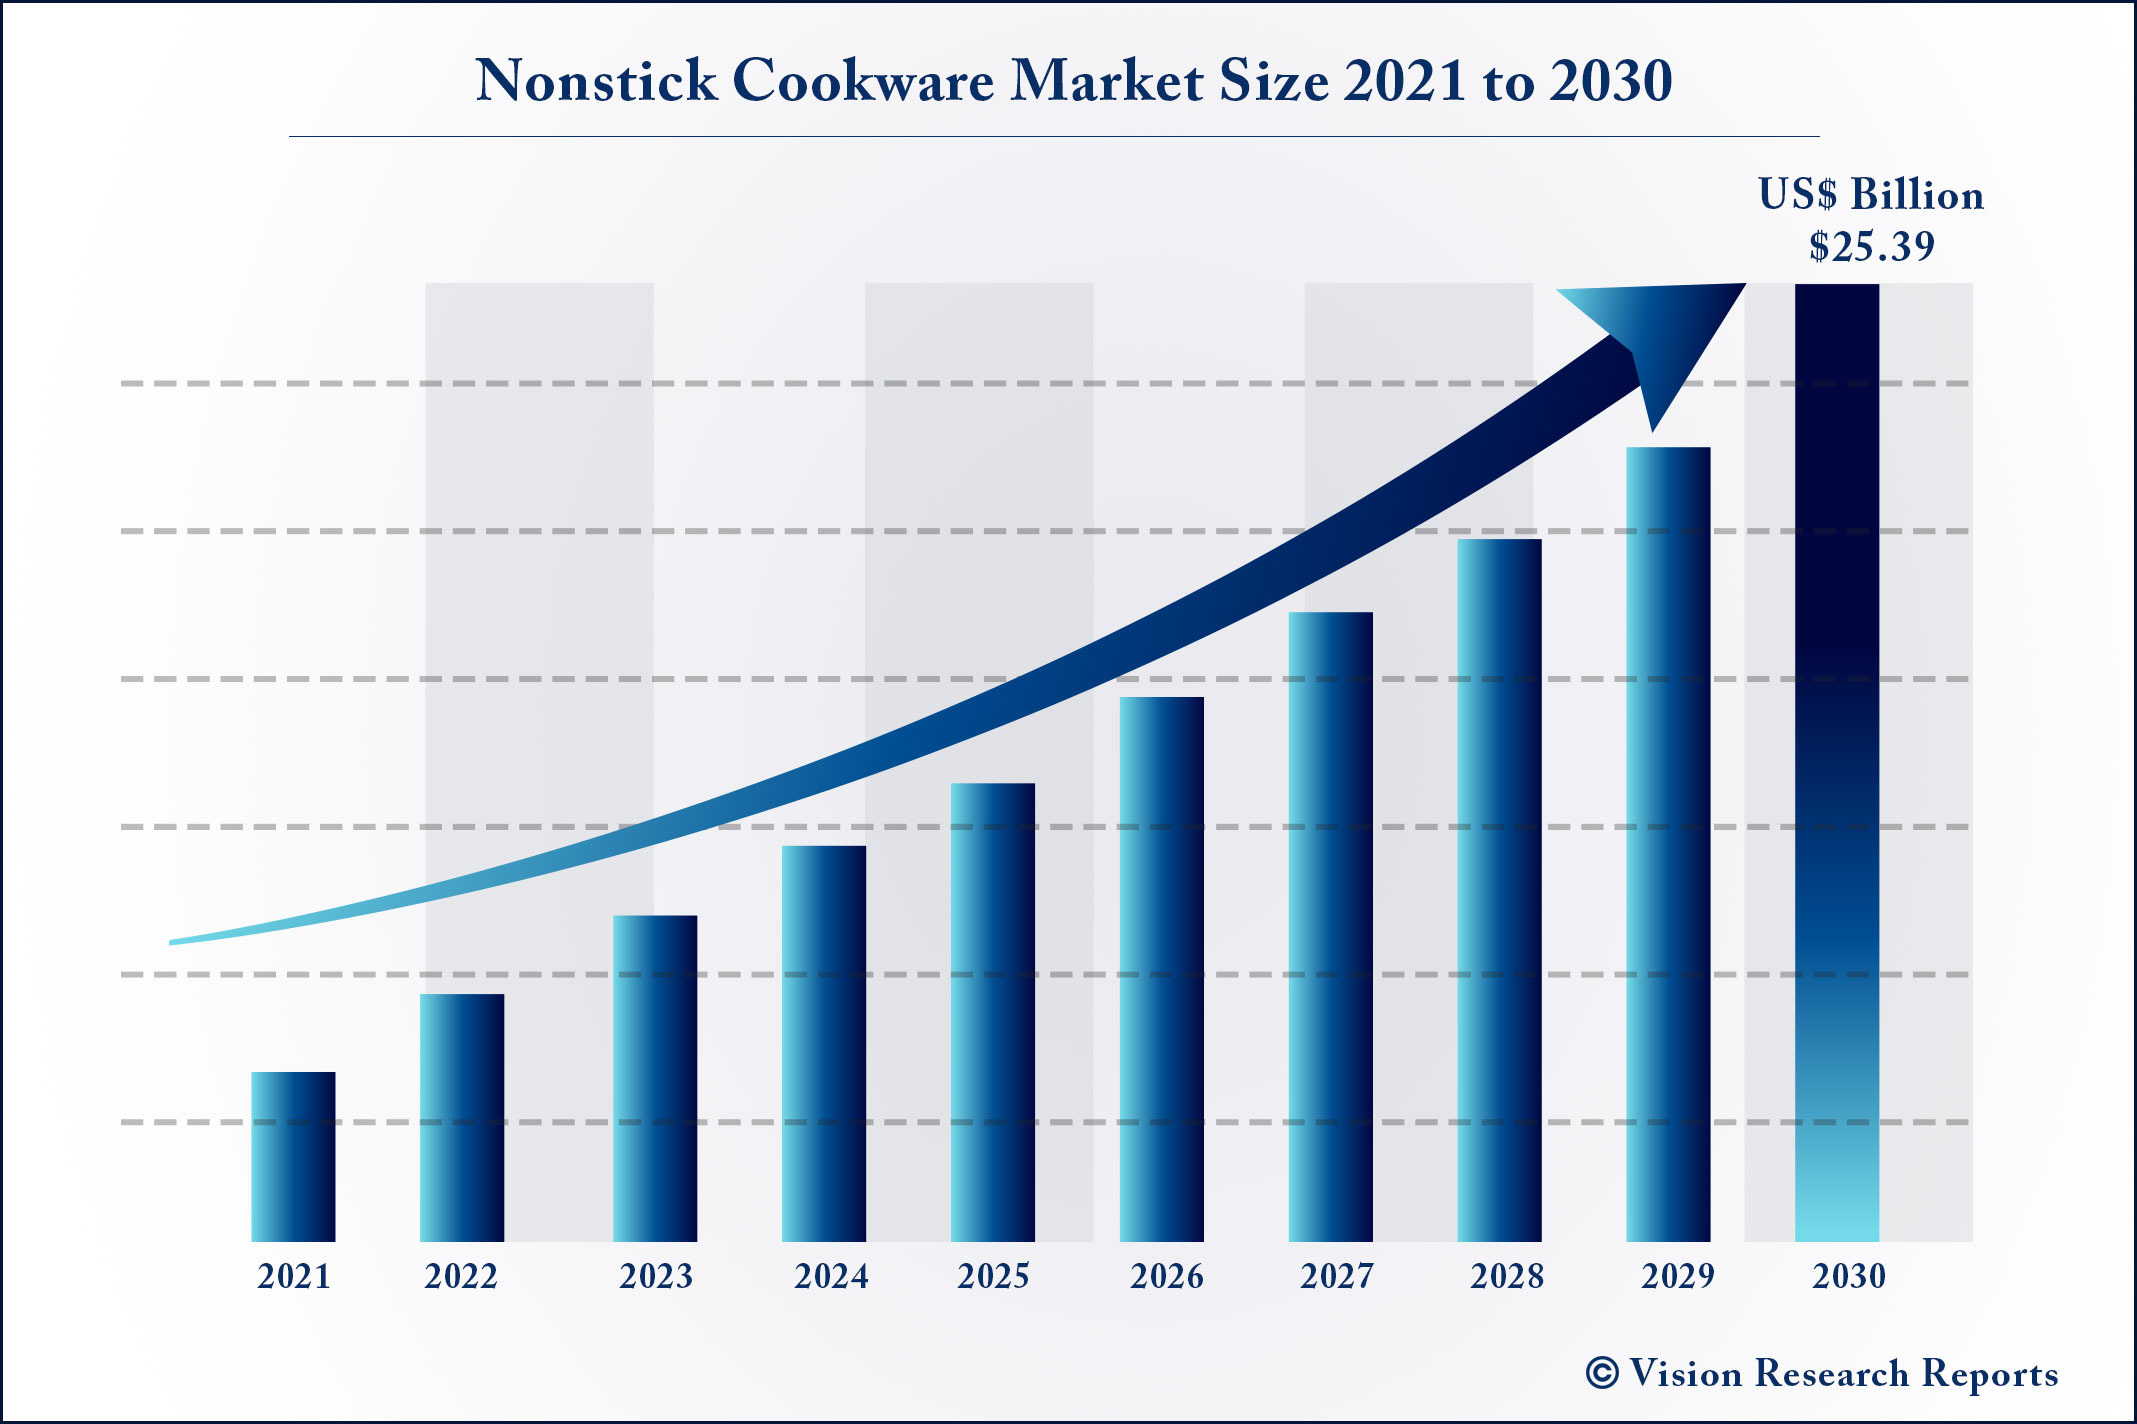 Nonstick Cookware Market Size 2021 to 2030